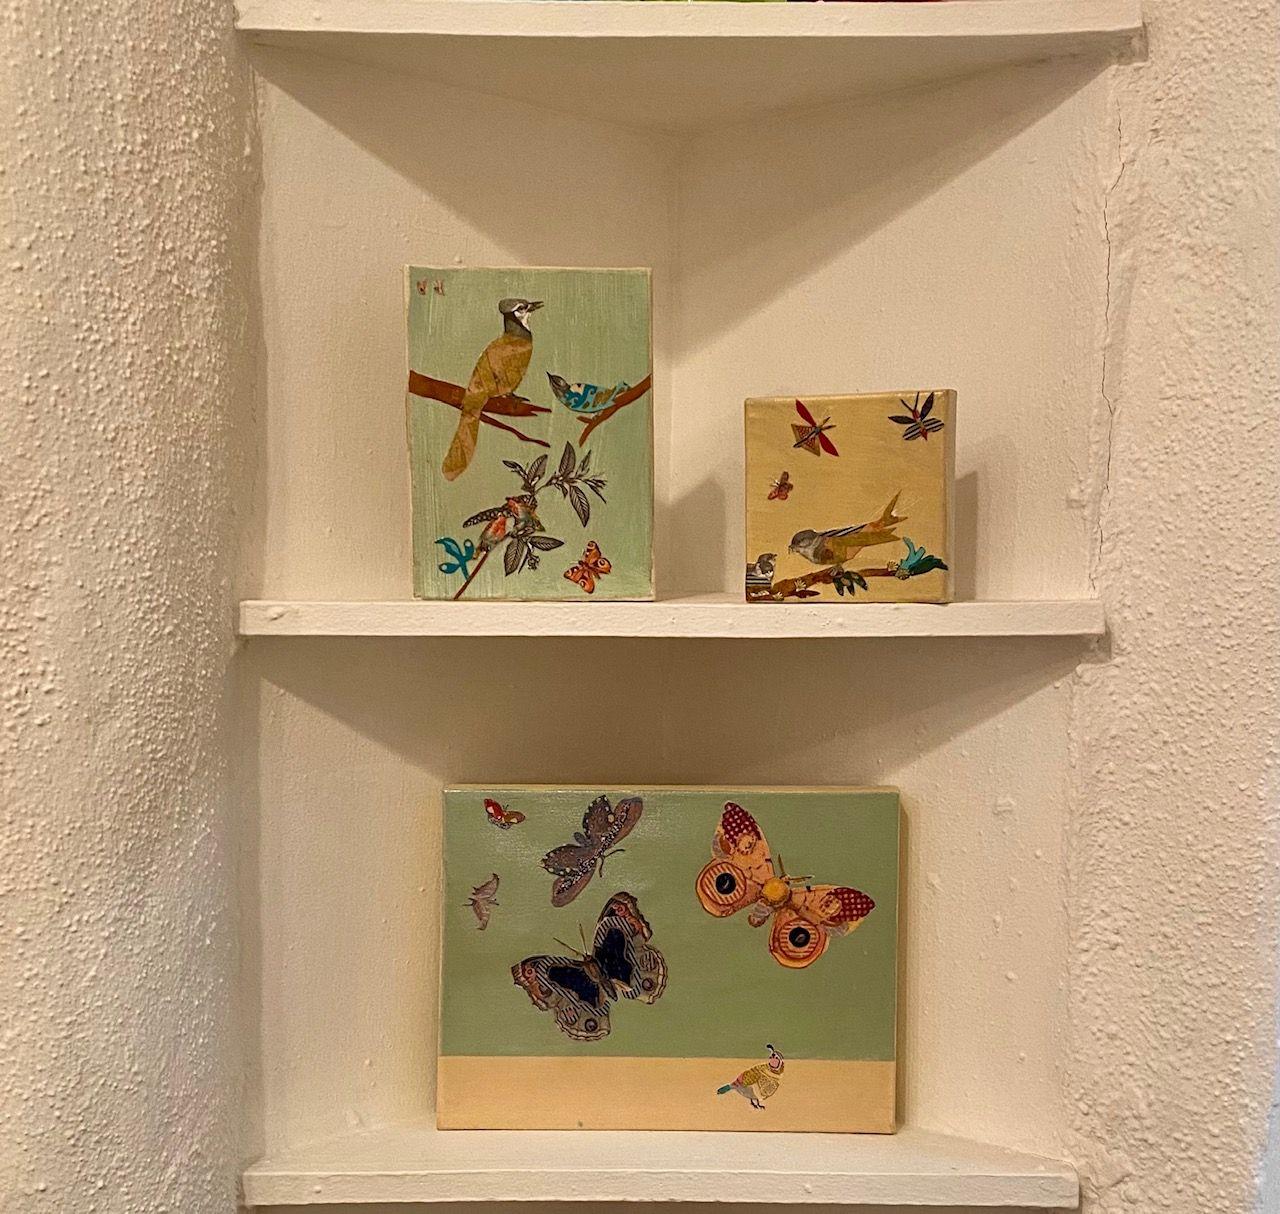 A lyrical mixed media painting featuring large butterflies and a very small quail.  Media used include acrylic paint, Japanese paper and collage elements. The painting is varnished with glazes of acrylic gel.  This application seals all the elements